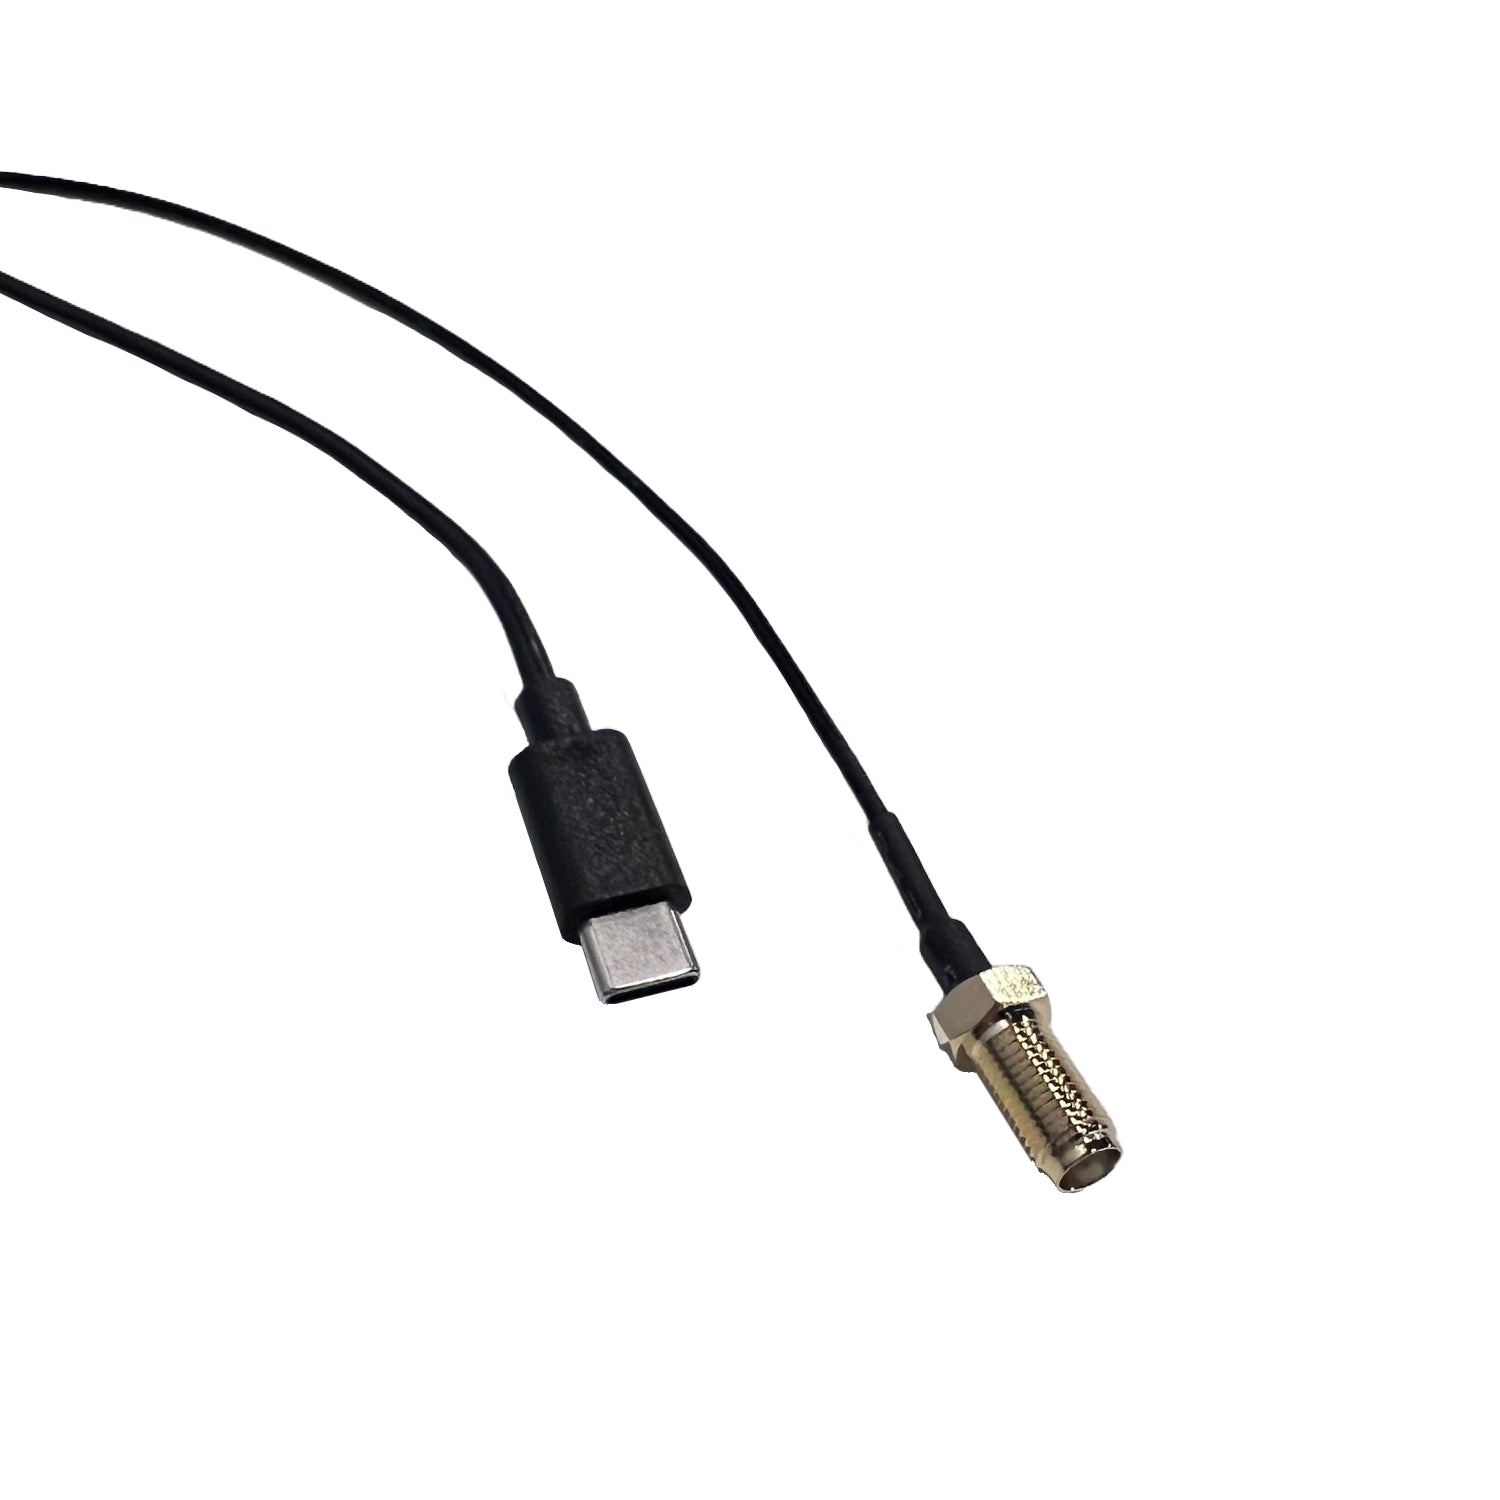 USB-C cable and SMA Antenna Connection